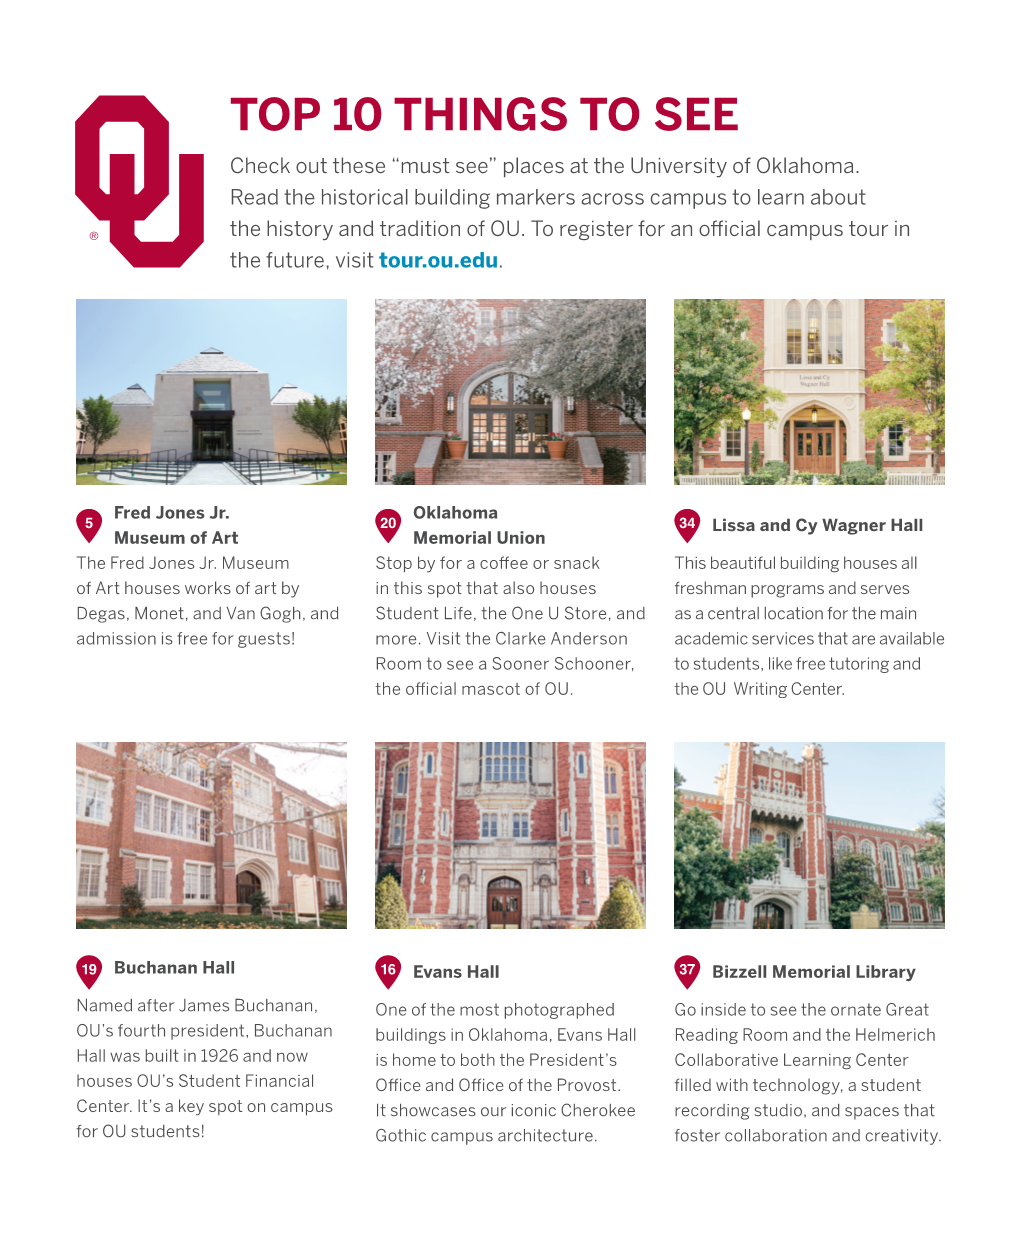 Top 10 Things to See on Campus